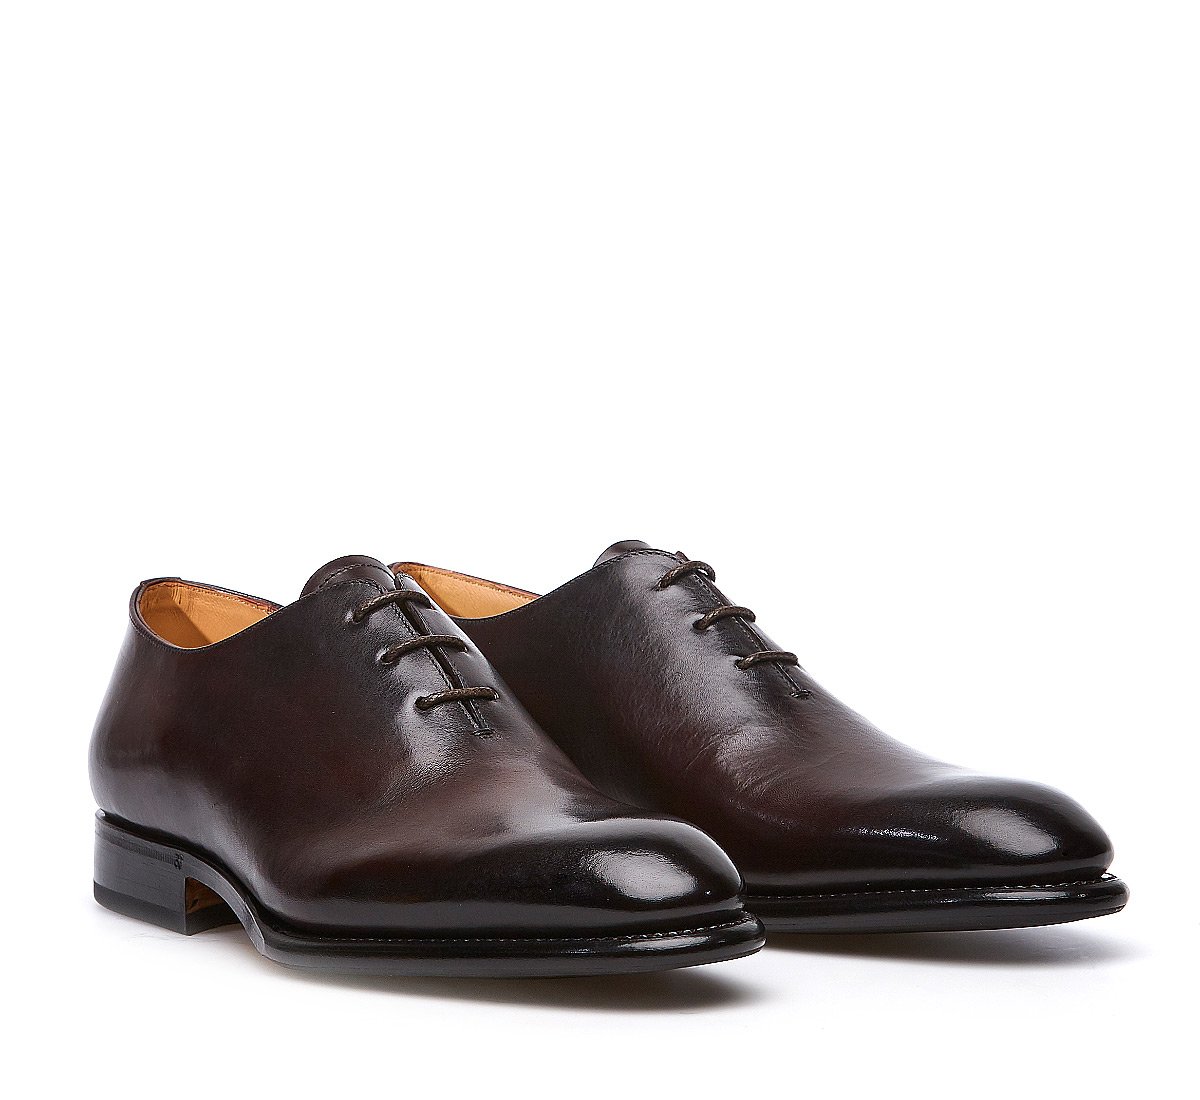 Three-eyelet lace-ups in soft calfskin with Flex Goodyear construction